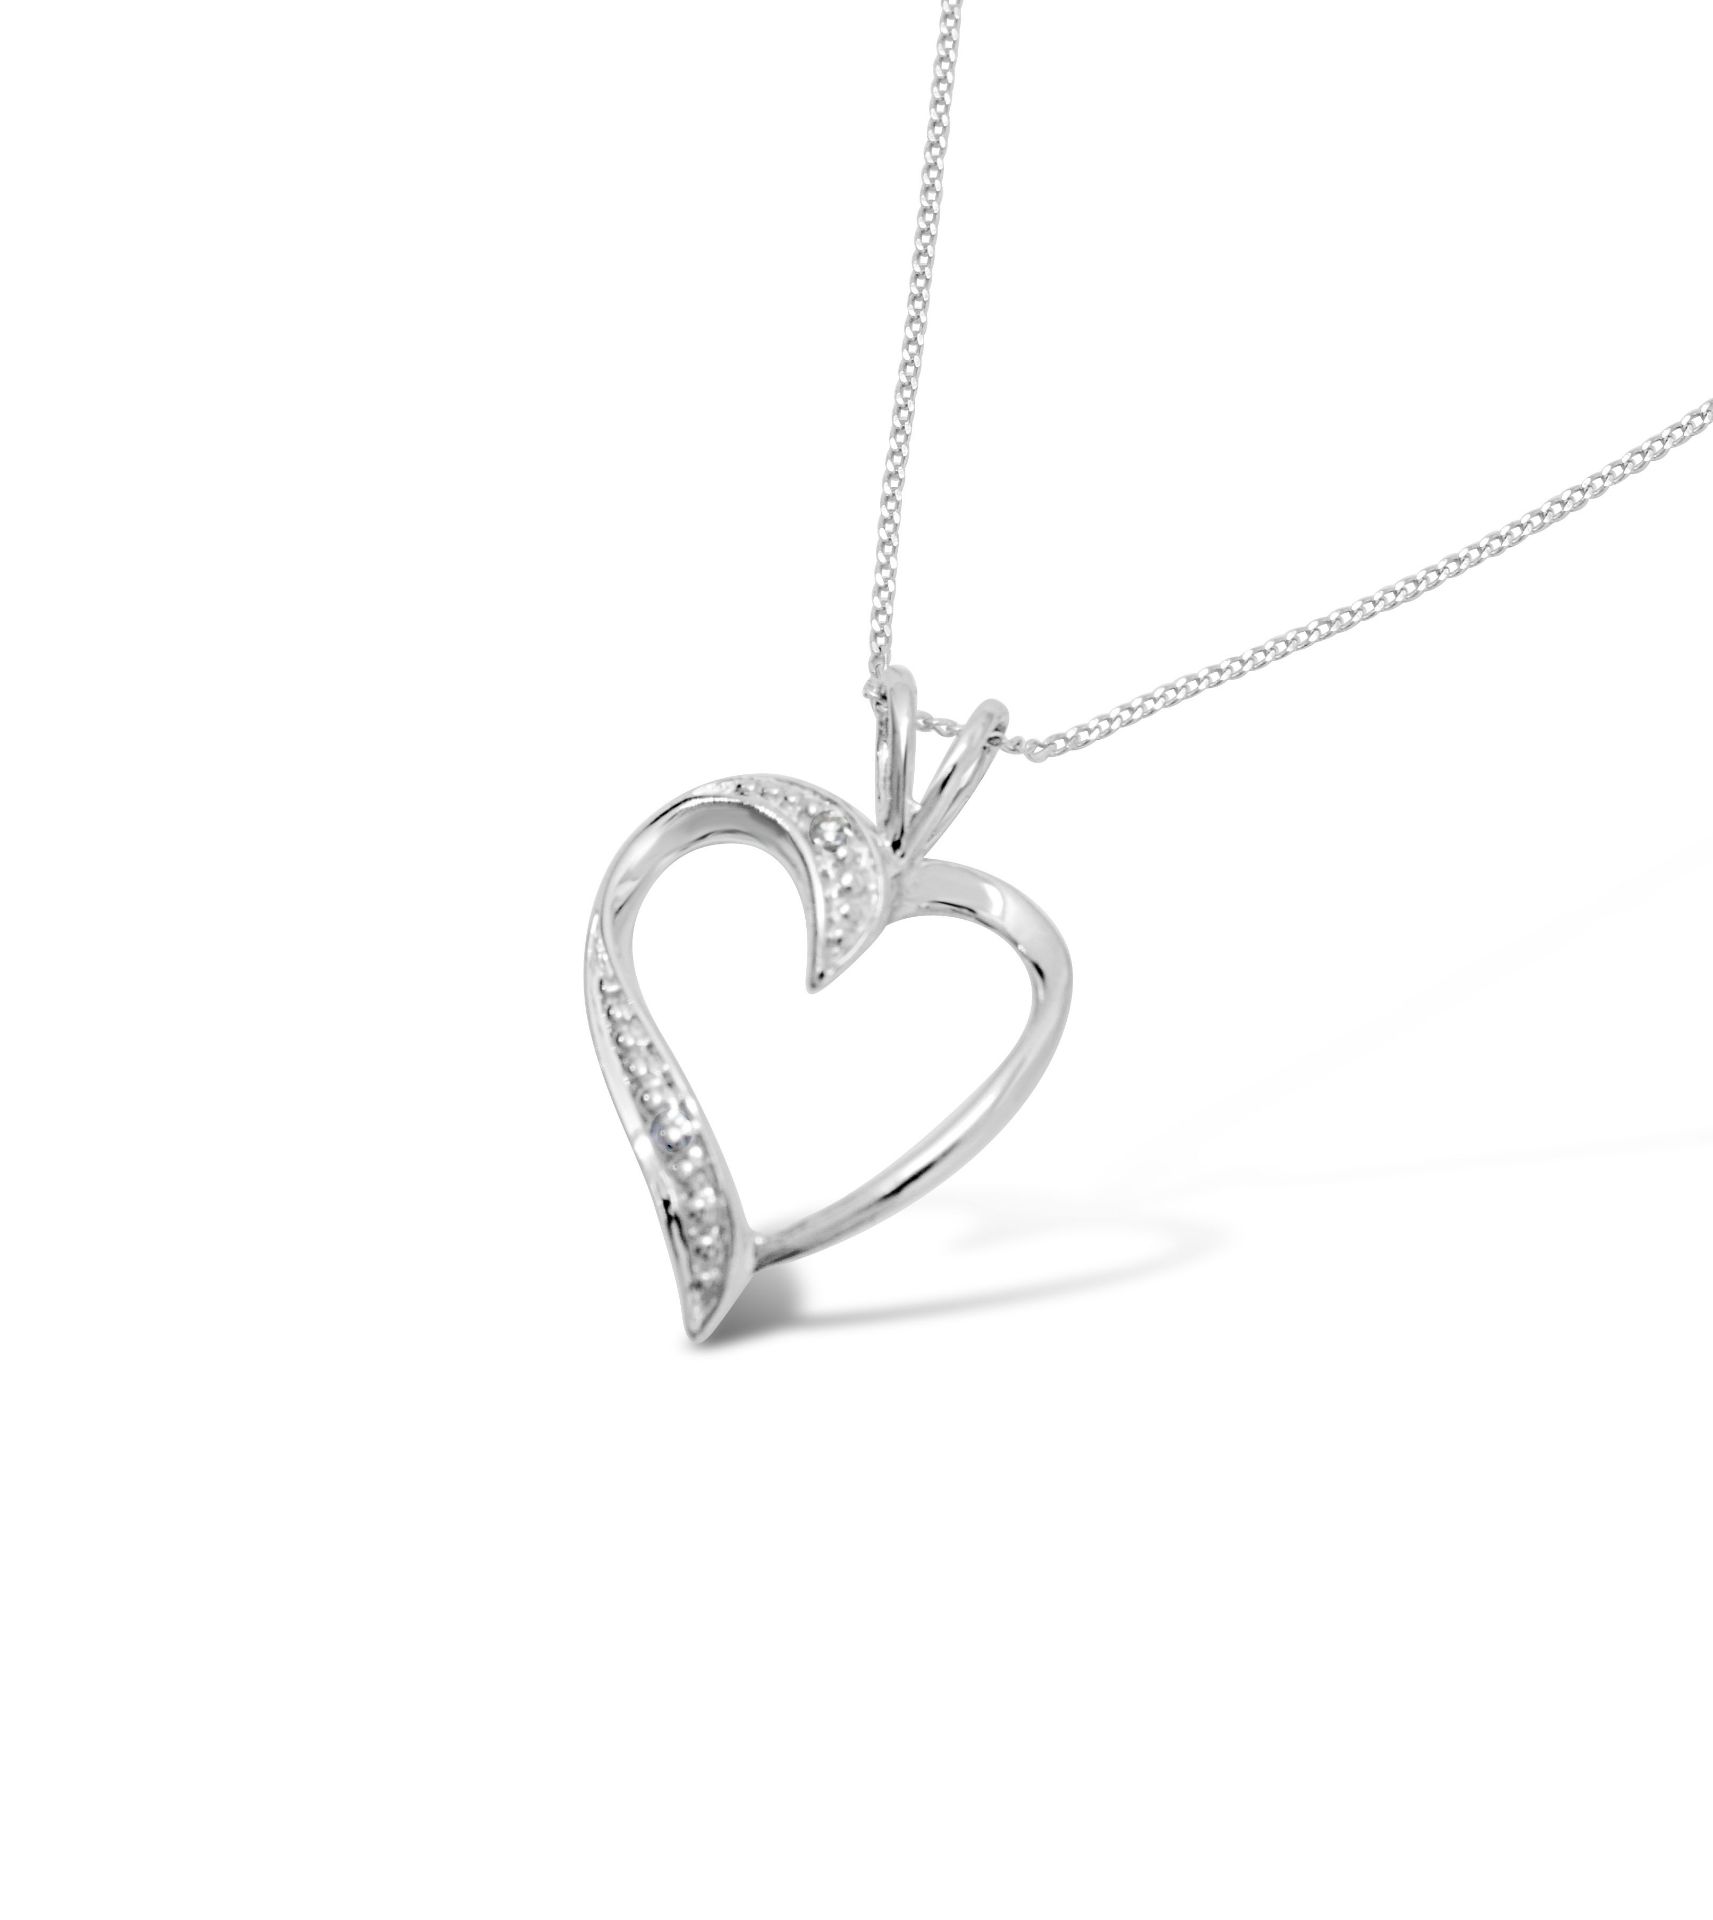 Heart Shaped Diamond Pendant with a White Gold Chain RRP £225 (PD27042)